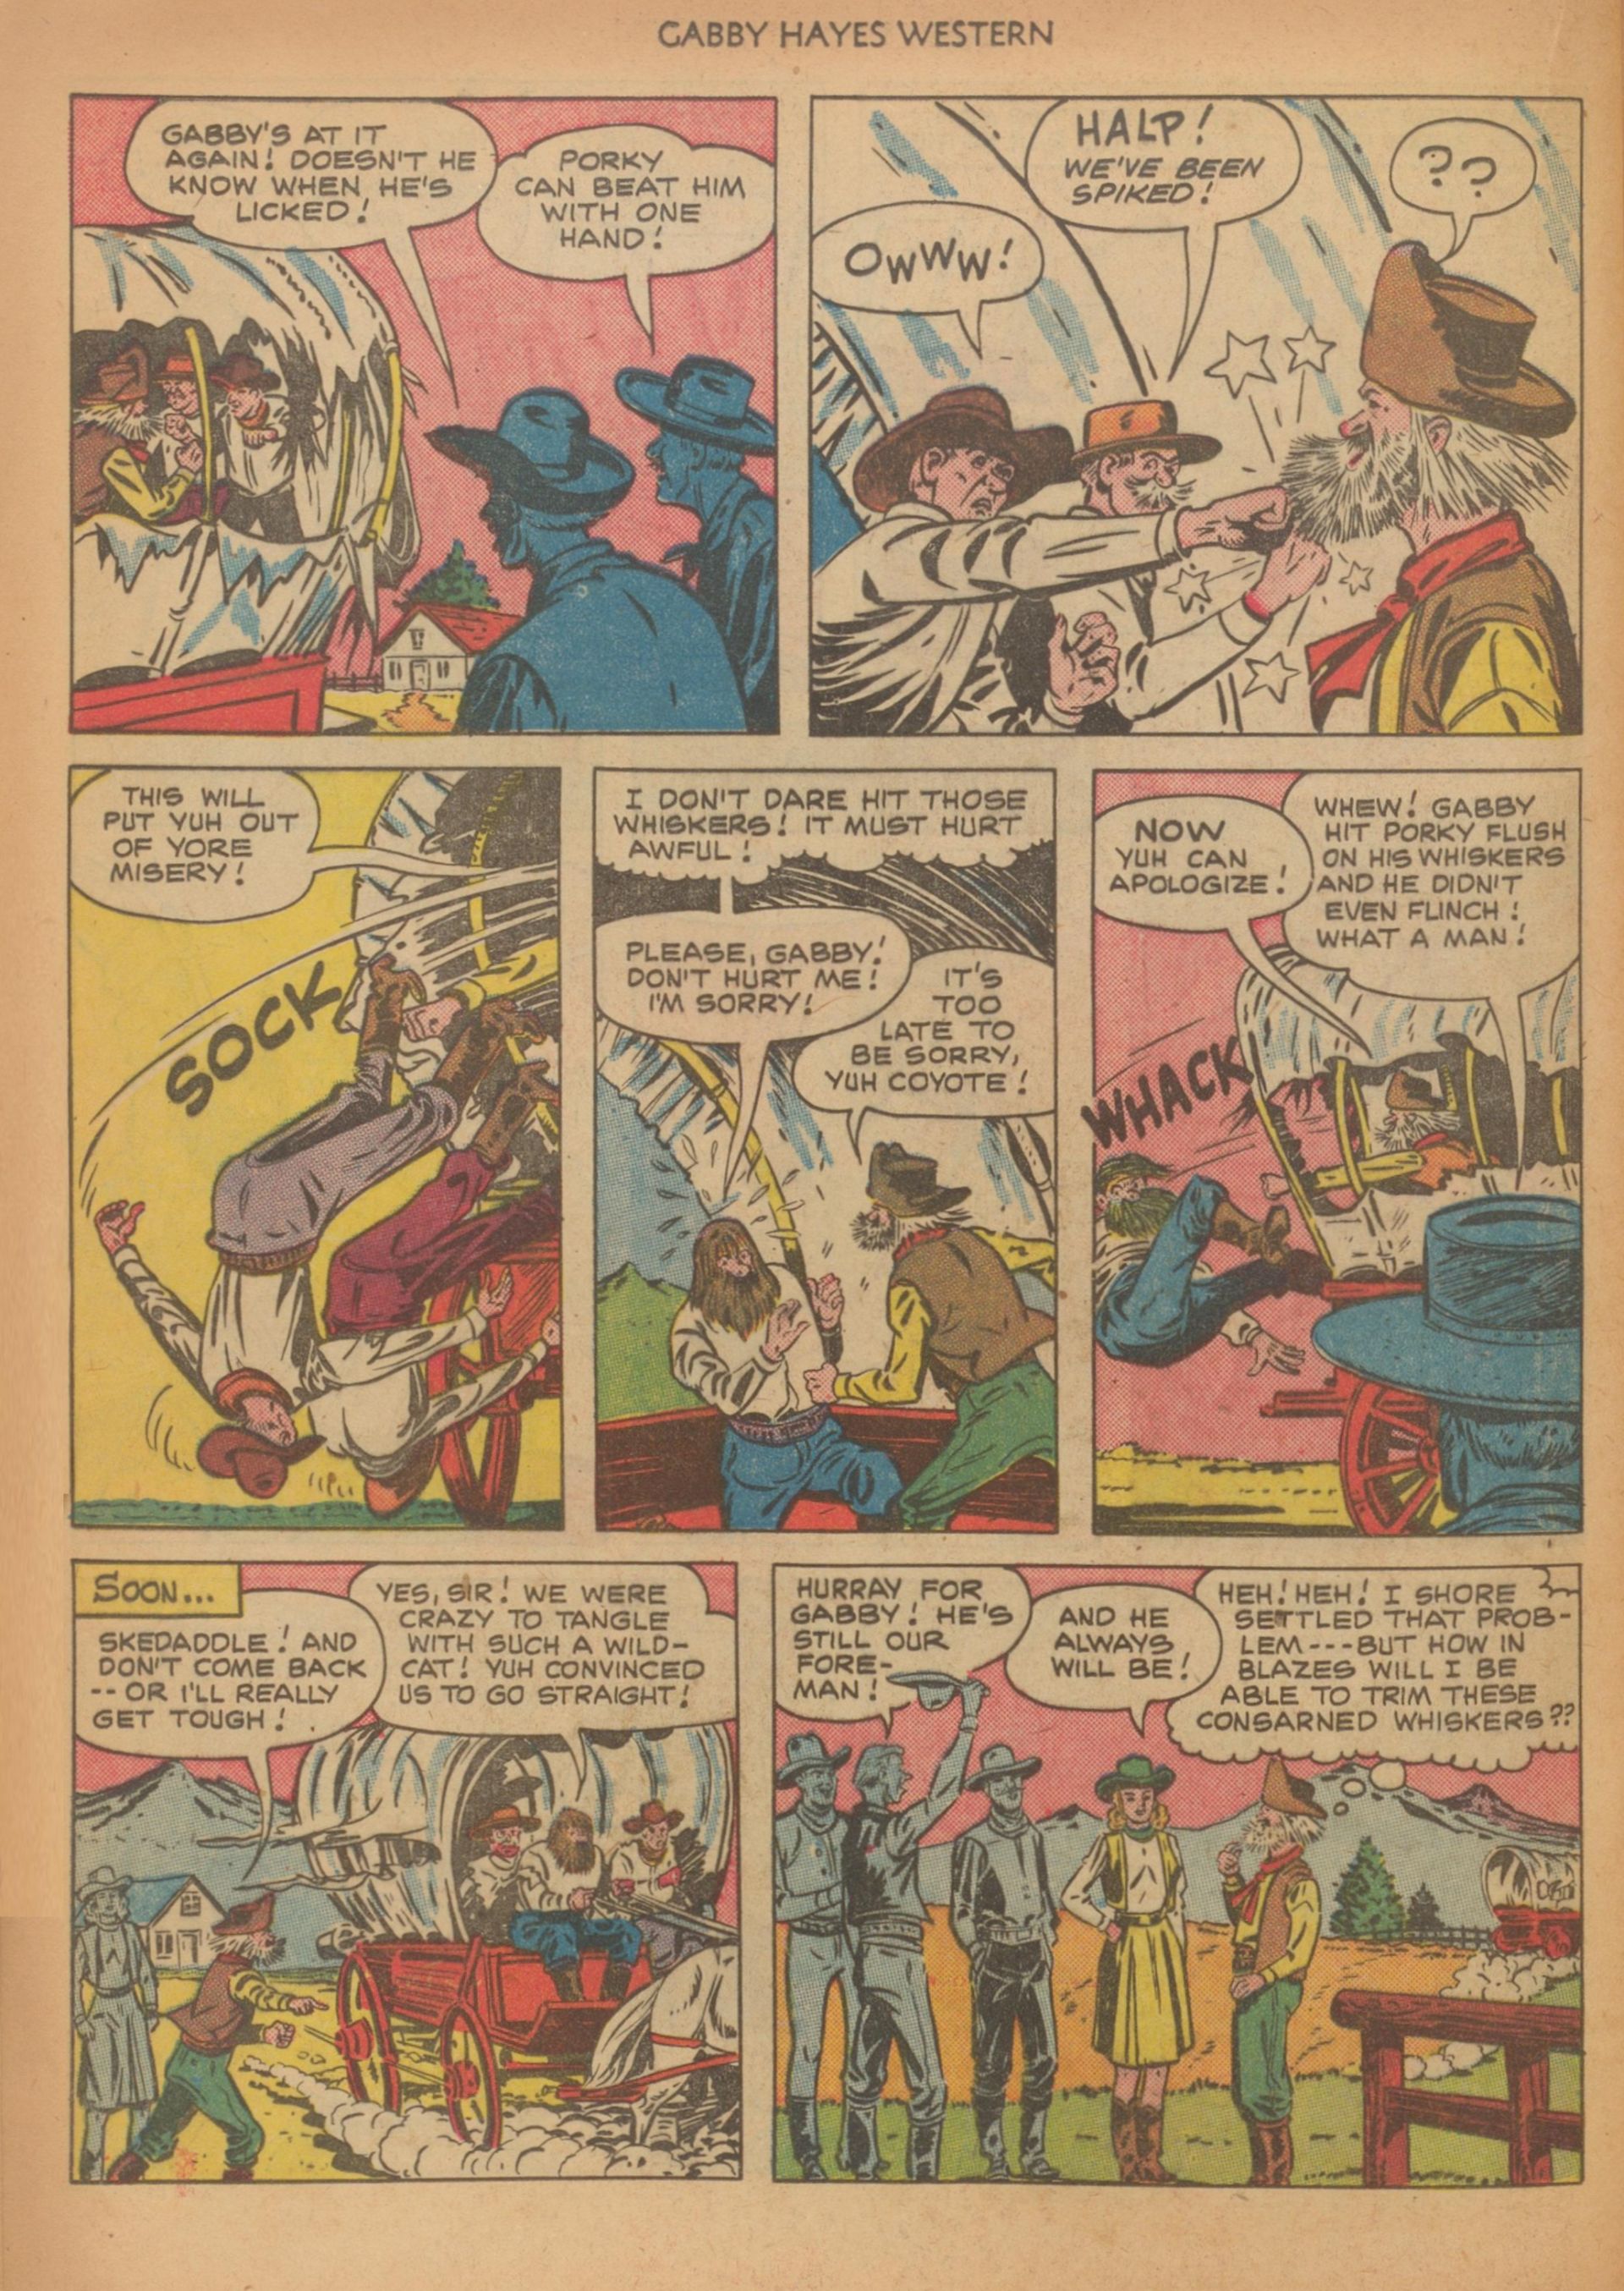 Read online Gabby Hayes Western comic -  Issue #29 - 36